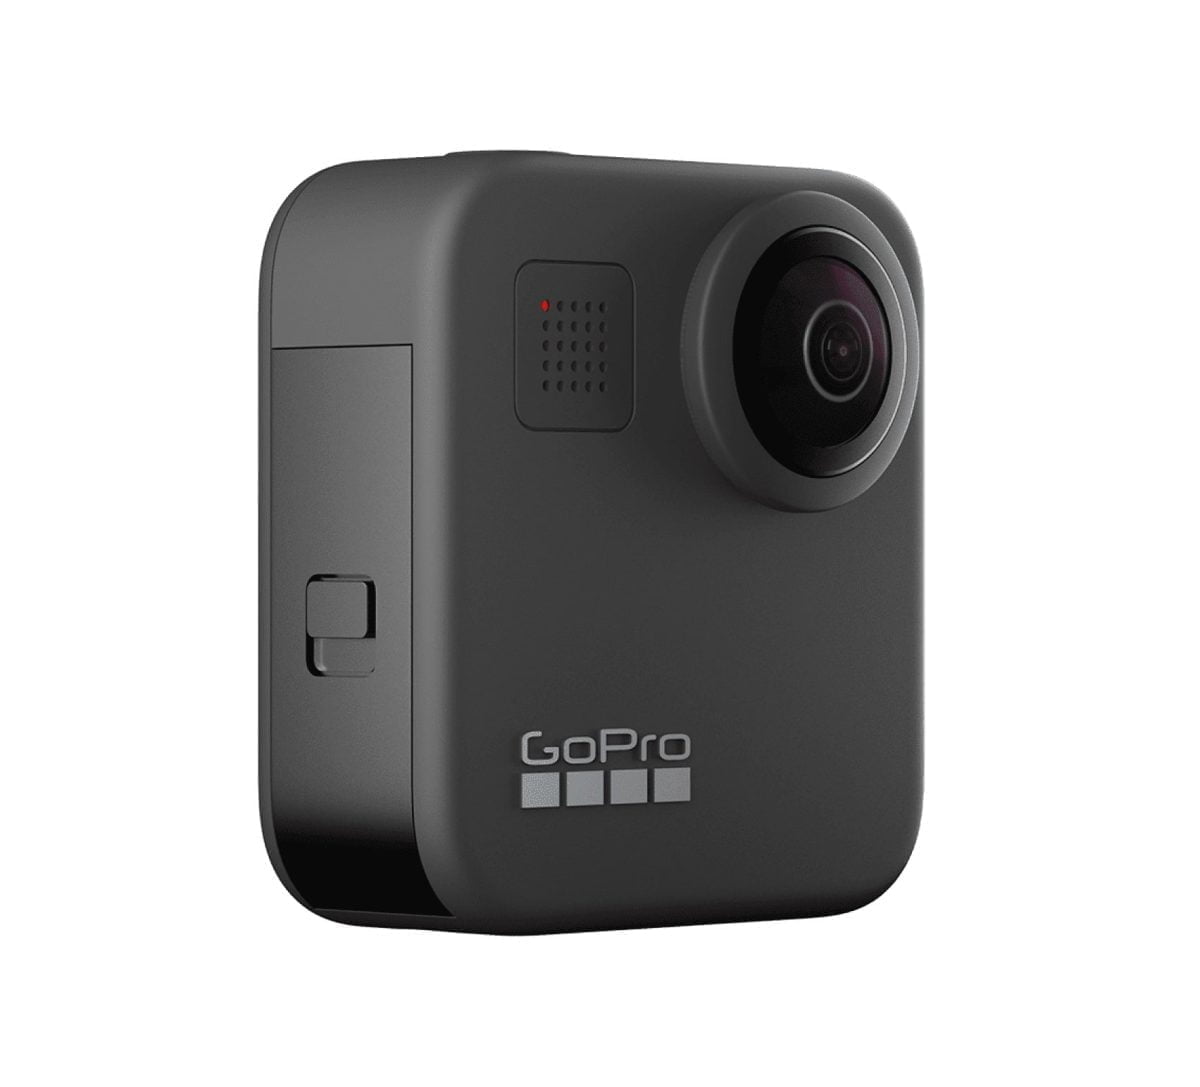 Pdp Max Gallery Angle2 1920 جوبرو &Lt;H1&Gt;Gopro Max - Waterproof 360 Digital Action Camera With Unbreakable Stabilization, Touch Screen And Voice Control - Live Hd Streaming&Lt;/H1&Gt; &Lt;Div Class=&Quot;Descriptionmodule_Bundles-Container__Skafo Col-Xlarge-6 Col-Large-6 Col-Medium-4 Col-Small-4 Col-Xsmall-8&Quot;&Gt; &Lt;Div Class=&Quot;Descriptionmodule_Detailslist__321Ps&Quot;&Gt; &Lt;P Class=&Quot;Header Header-5&Quot;&Gt;Product Details&Lt;/P&Gt; &Lt;Div Class=&Quot;Row Descriptionmodule_Bundles__3Ah0V Descriptionmodule_Detailitem__1Q3Hp&Quot;&Gt; &Lt;Ul&Gt; &Lt;Li Class=&Quot;Paragraph Paragraph-Small&Quot;&Gt;Shoot Hero Mode Or Go With 360 Mode For Stunning 6K.⁵&Lt;/Li&Gt; &Lt;Li Class=&Quot;Paragraph Paragraph-Small&Quot;&Gt;Unbreakable Stabilization From Max Hypersmooth&Lt;/Li&Gt; &Lt;Li Class=&Quot;Paragraph Paragraph-Small&Quot;&Gt;Waterproof To 16Ft + Built Tough&Lt;/Li&Gt; &Lt;Li Class=&Quot;Paragraph Paragraph-Small&Quot;&Gt;Premium 360 + Stereo Audio From 6 Mics&Lt;/Li&Gt; &Lt;Li Class=&Quot;Paragraph Paragraph-Small&Quot;&Gt;Vlog To The Max With 1080P Live Streaming&Lt;/Li&Gt; &Lt;Li Class=&Quot;Paragraph Paragraph-Small&Quot;&Gt;Max Timewarp, Powerpano, 4 Digital Lenses + So Many Other Features To Nail Any Shot&Lt;/Li&Gt; &Lt;Li Class=&Quot;Paragraph Paragraph-Small&Quot;&Gt;Compatible With Quik App&Lt;/Li&Gt; &Lt;Li Class=&Quot;Paragraph Paragraph-Small&Quot;&Gt;Compatible With Over 30 Mounts + Accessories&Lt;/Li&Gt; &Lt;/Ul&Gt; &Lt;/Div&Gt; &Lt;/Div&Gt; &Lt;/Div&Gt; &Nbsp; Gopro Max Gopro Max - Waterproof 360 Digital Action Camera With Unbreakable Stabilization, Touch Screen And Voice Control - Live Hd Streaming